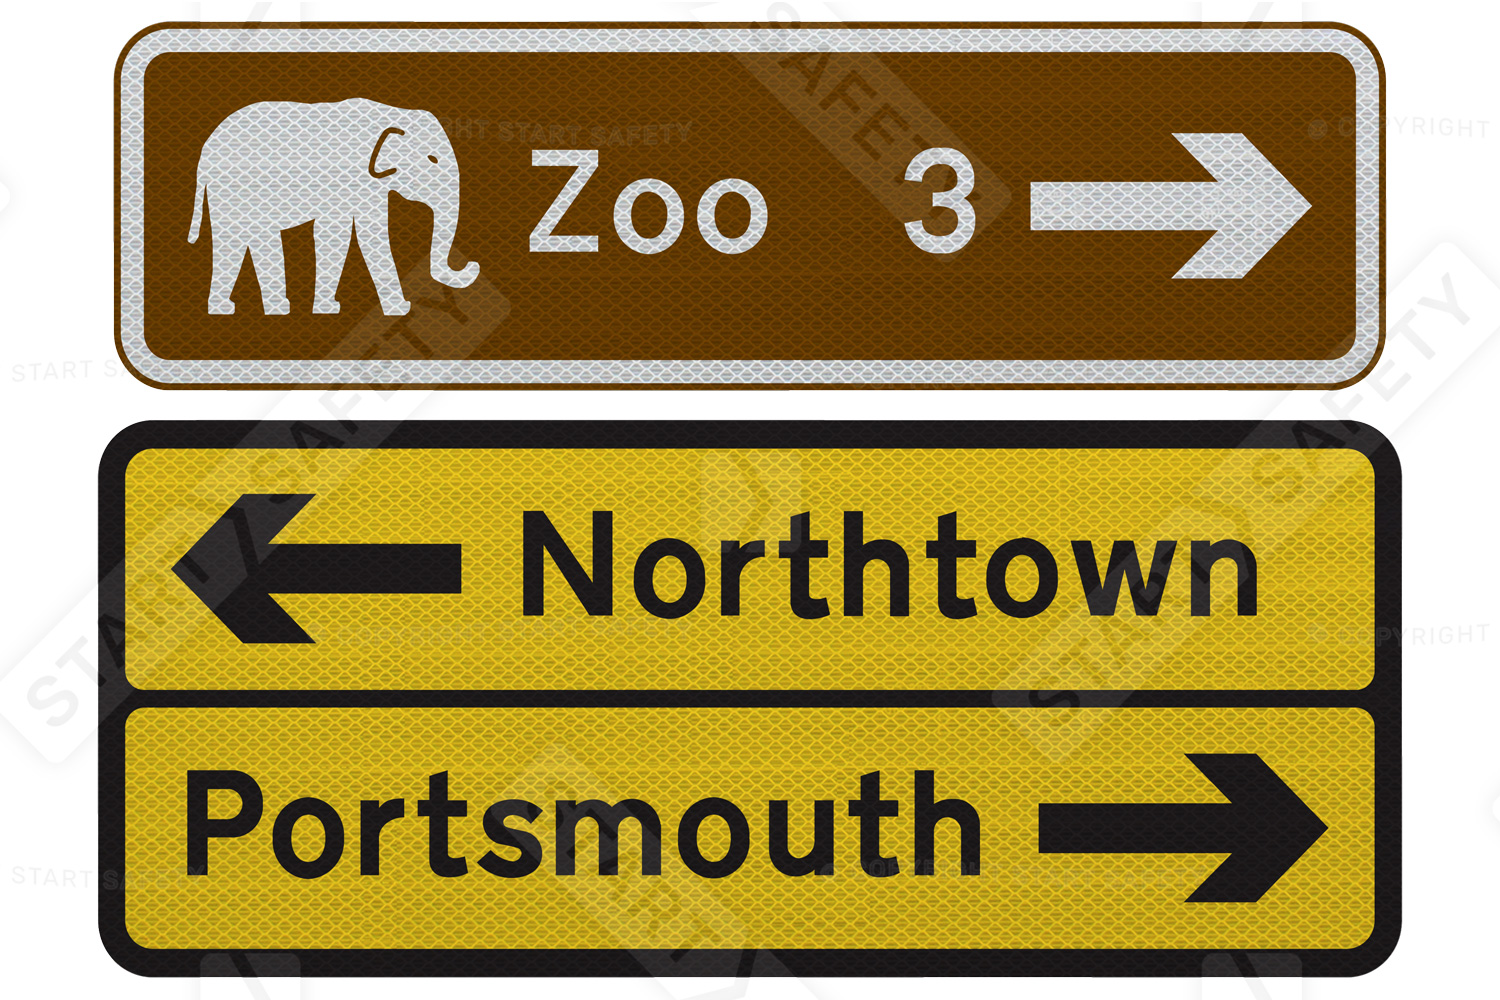 Types of Directional Signs Found on The Road